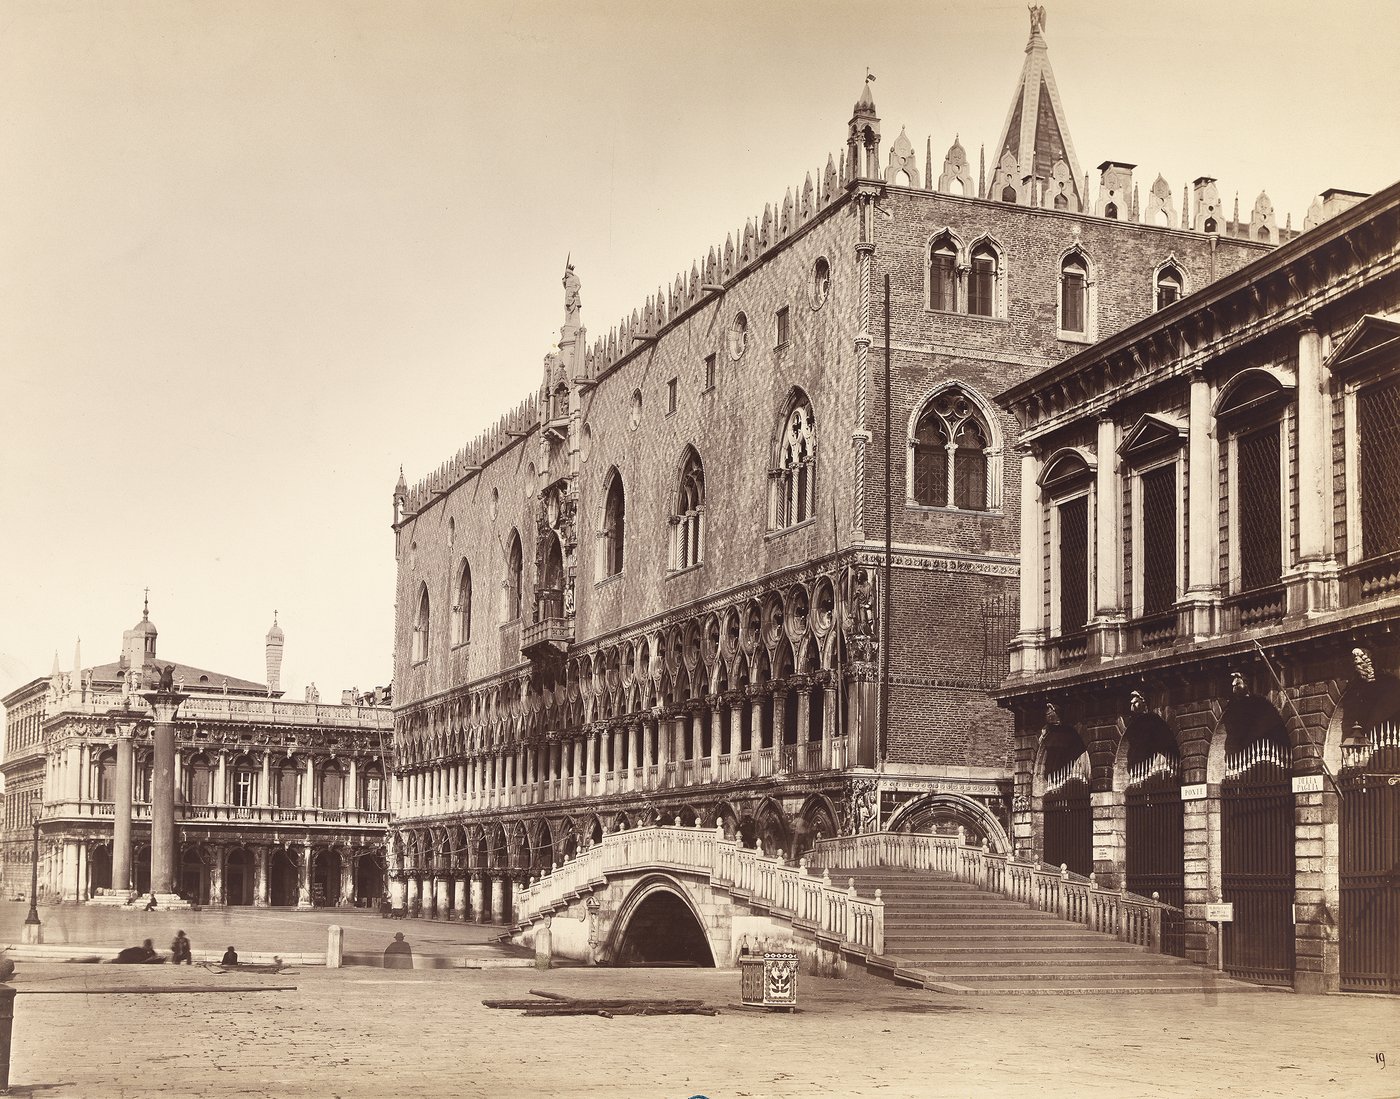 A black and white sepia photograph depicting the Doge's Palace and a small bridge. The architecture corresponds to the Venetian Gothic style and therefore shows divided windows and ornaments tapering towards the top, as well as a loggia-like passageway supported by columns and pillars. On the left side of the picture, a few people are slightly blurred.